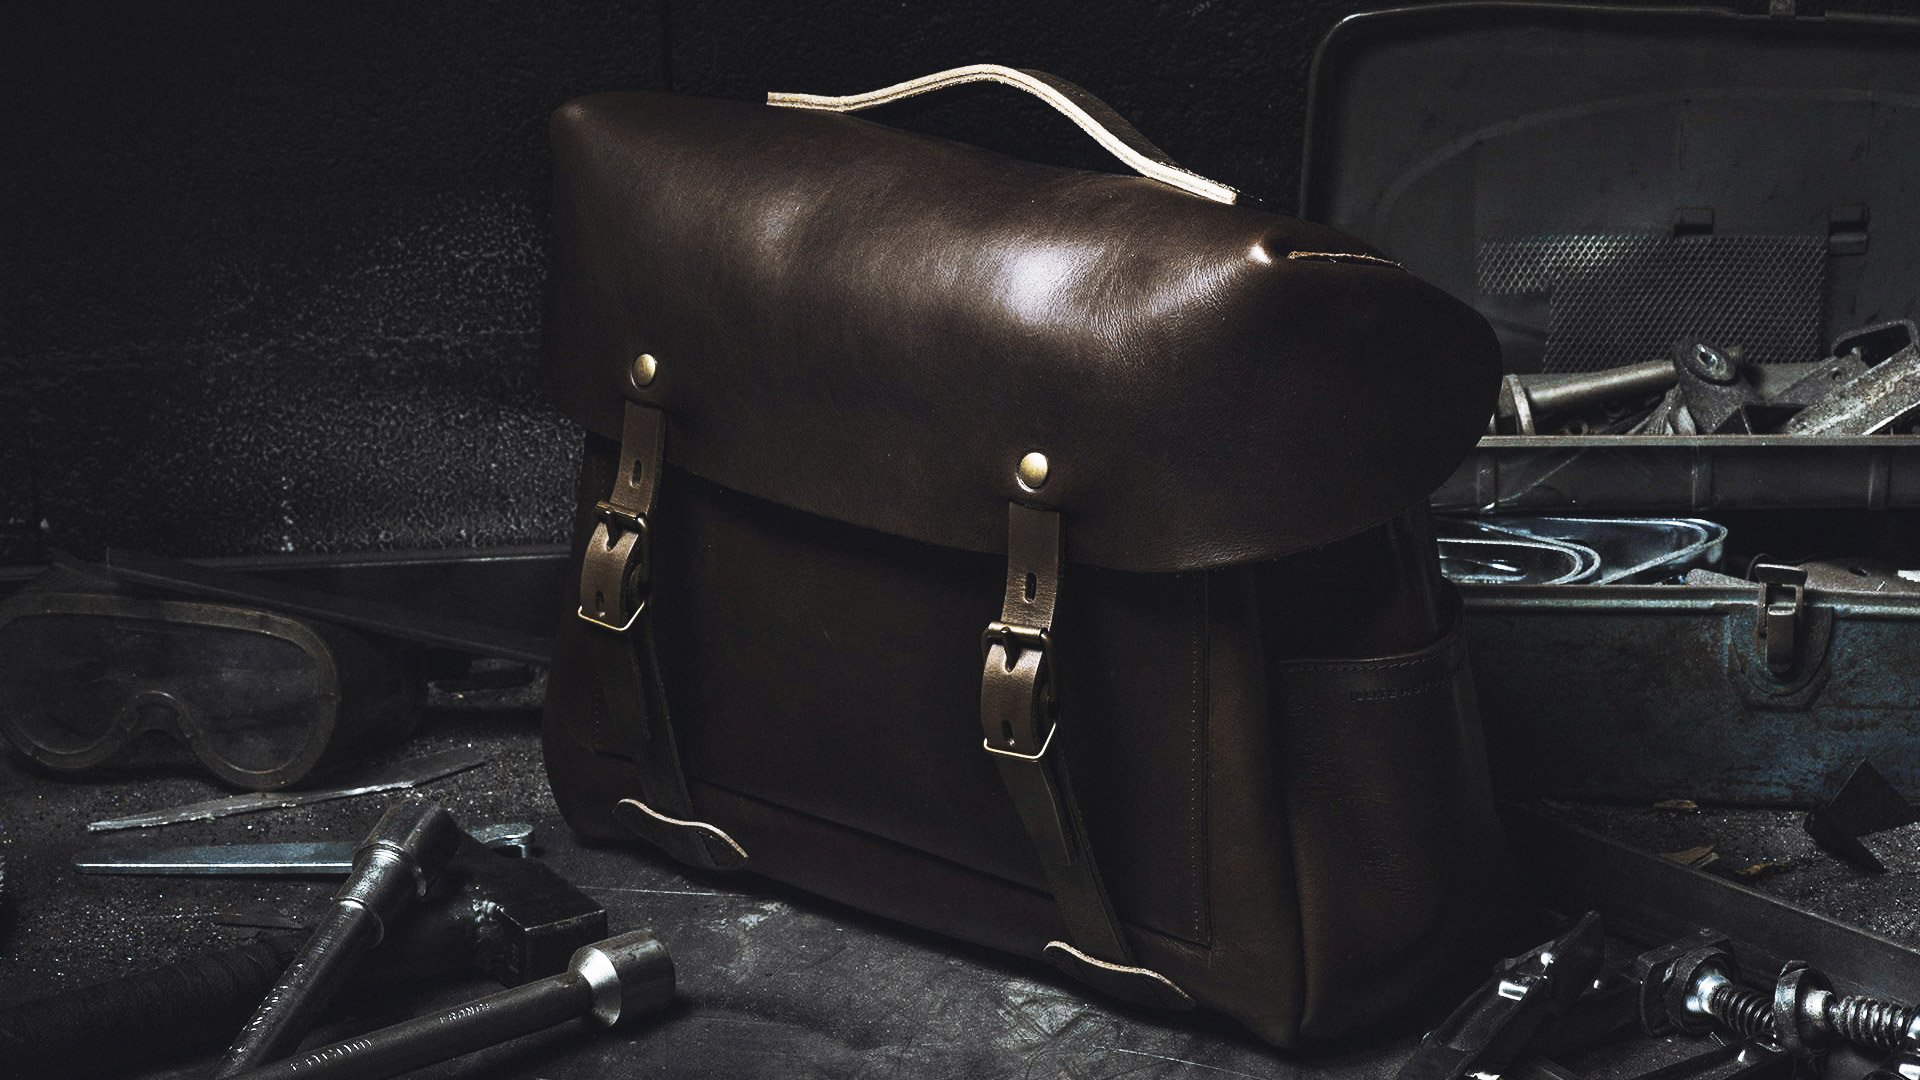 Leather bike bag at the garage tool center